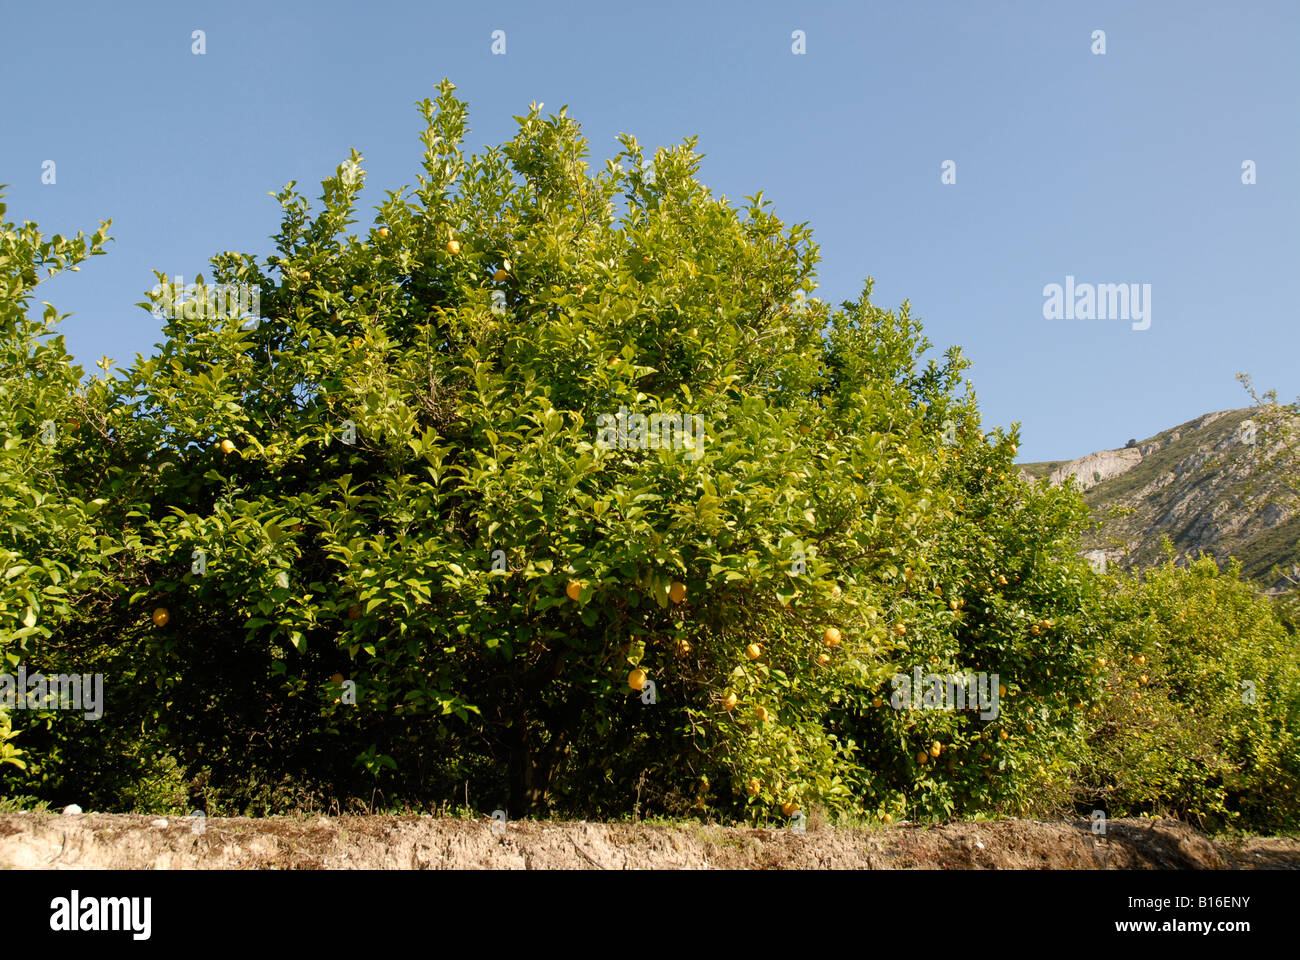 orchard of lemon trees, Pedreguer, Alicante Province, Spain Stock Photo